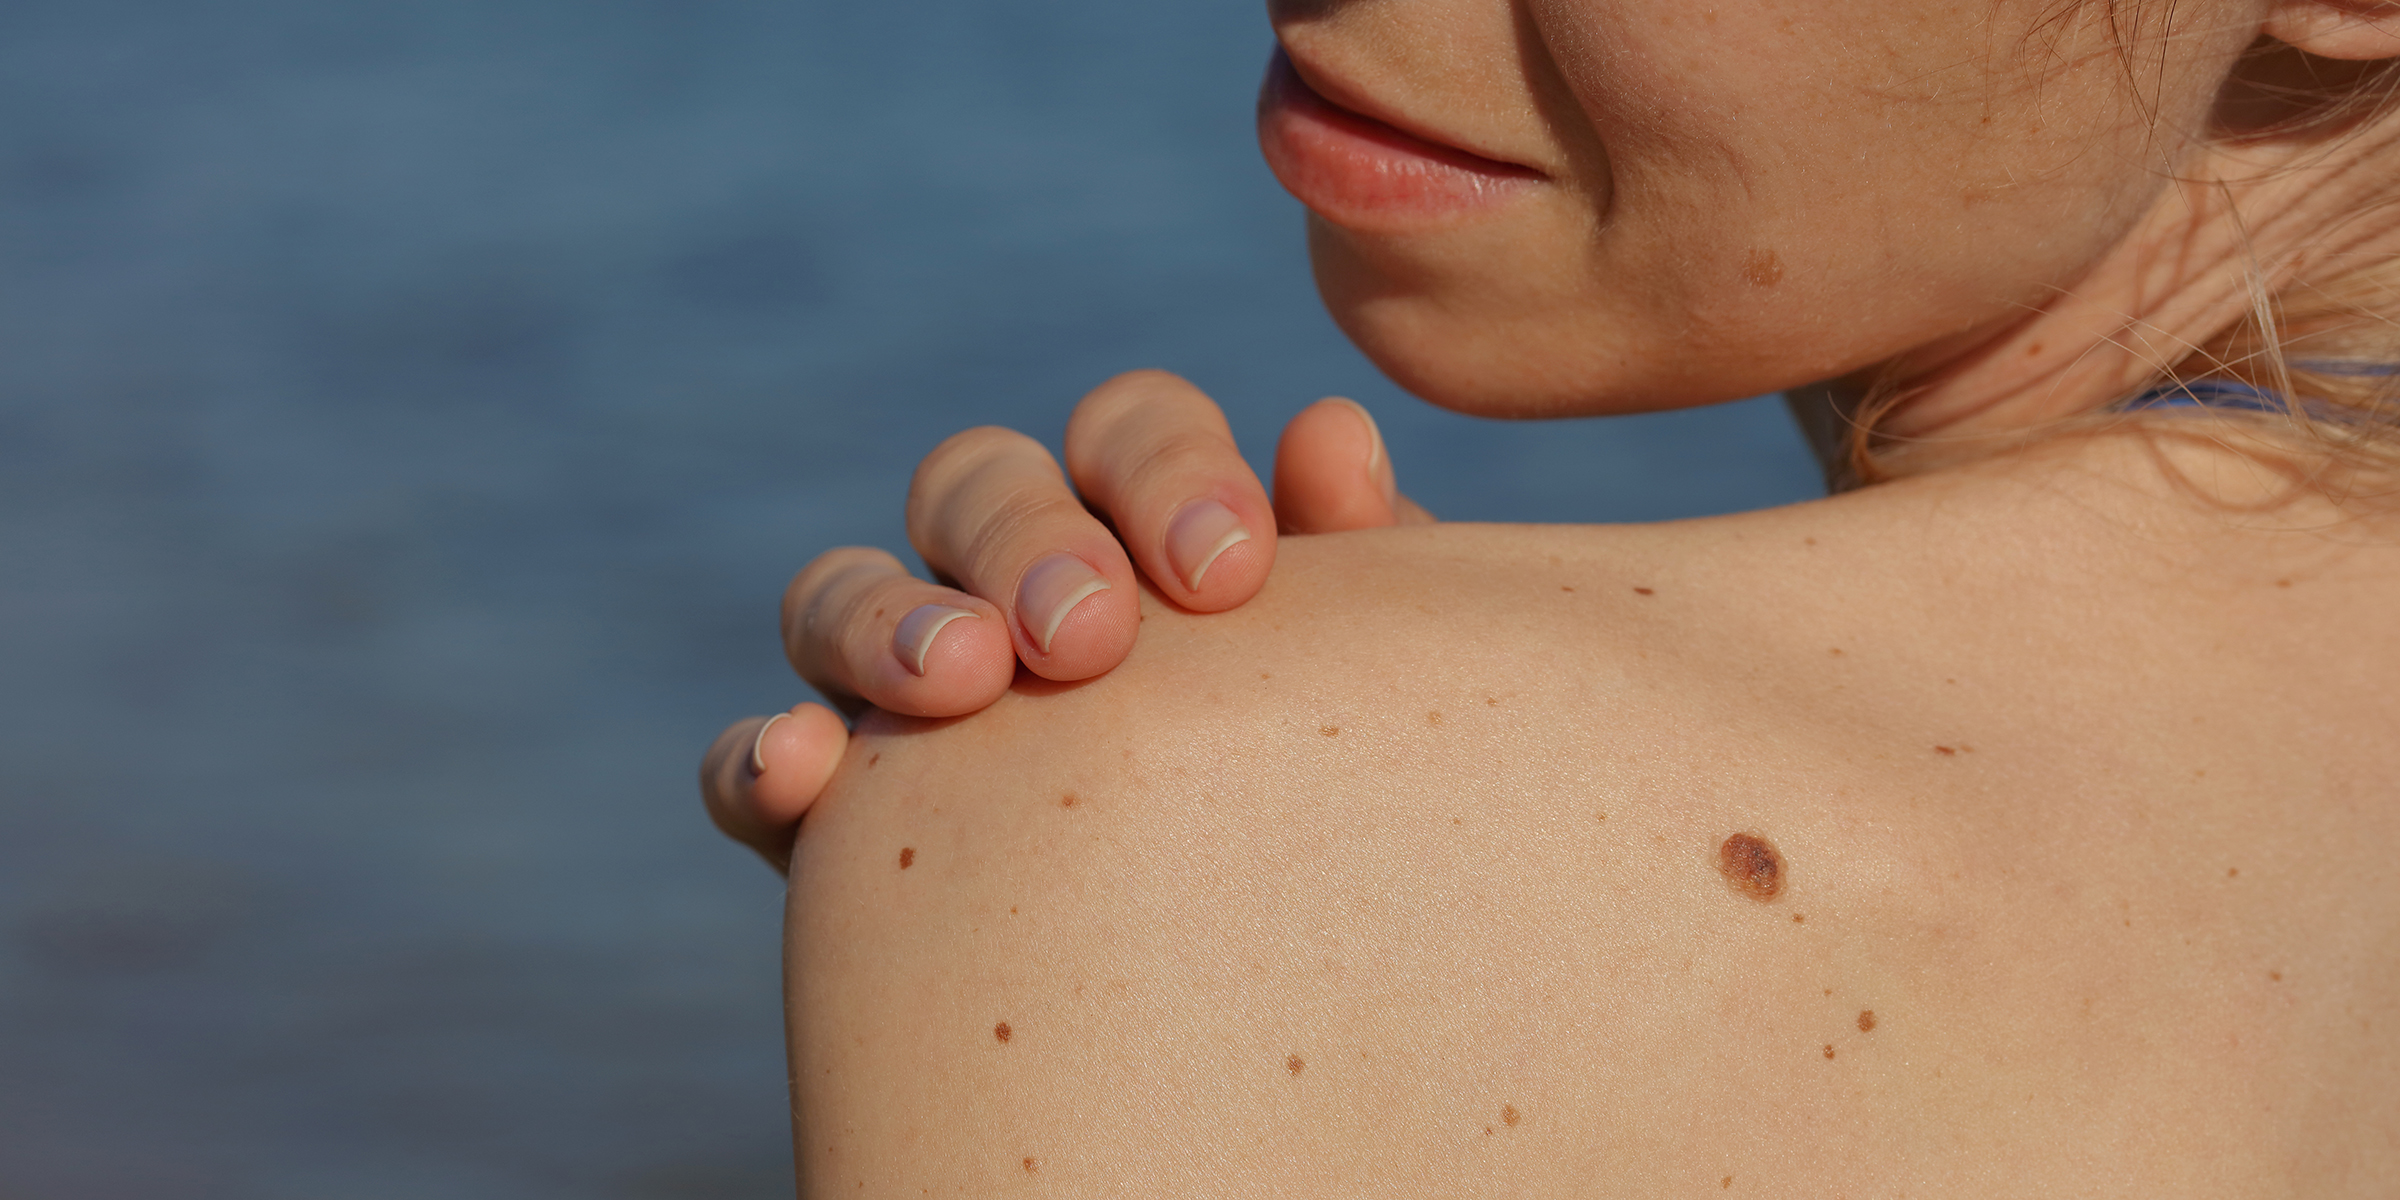 Checking benign moles : Beautiful Woman with birthmarks on her back and face. Laser skin tags removal